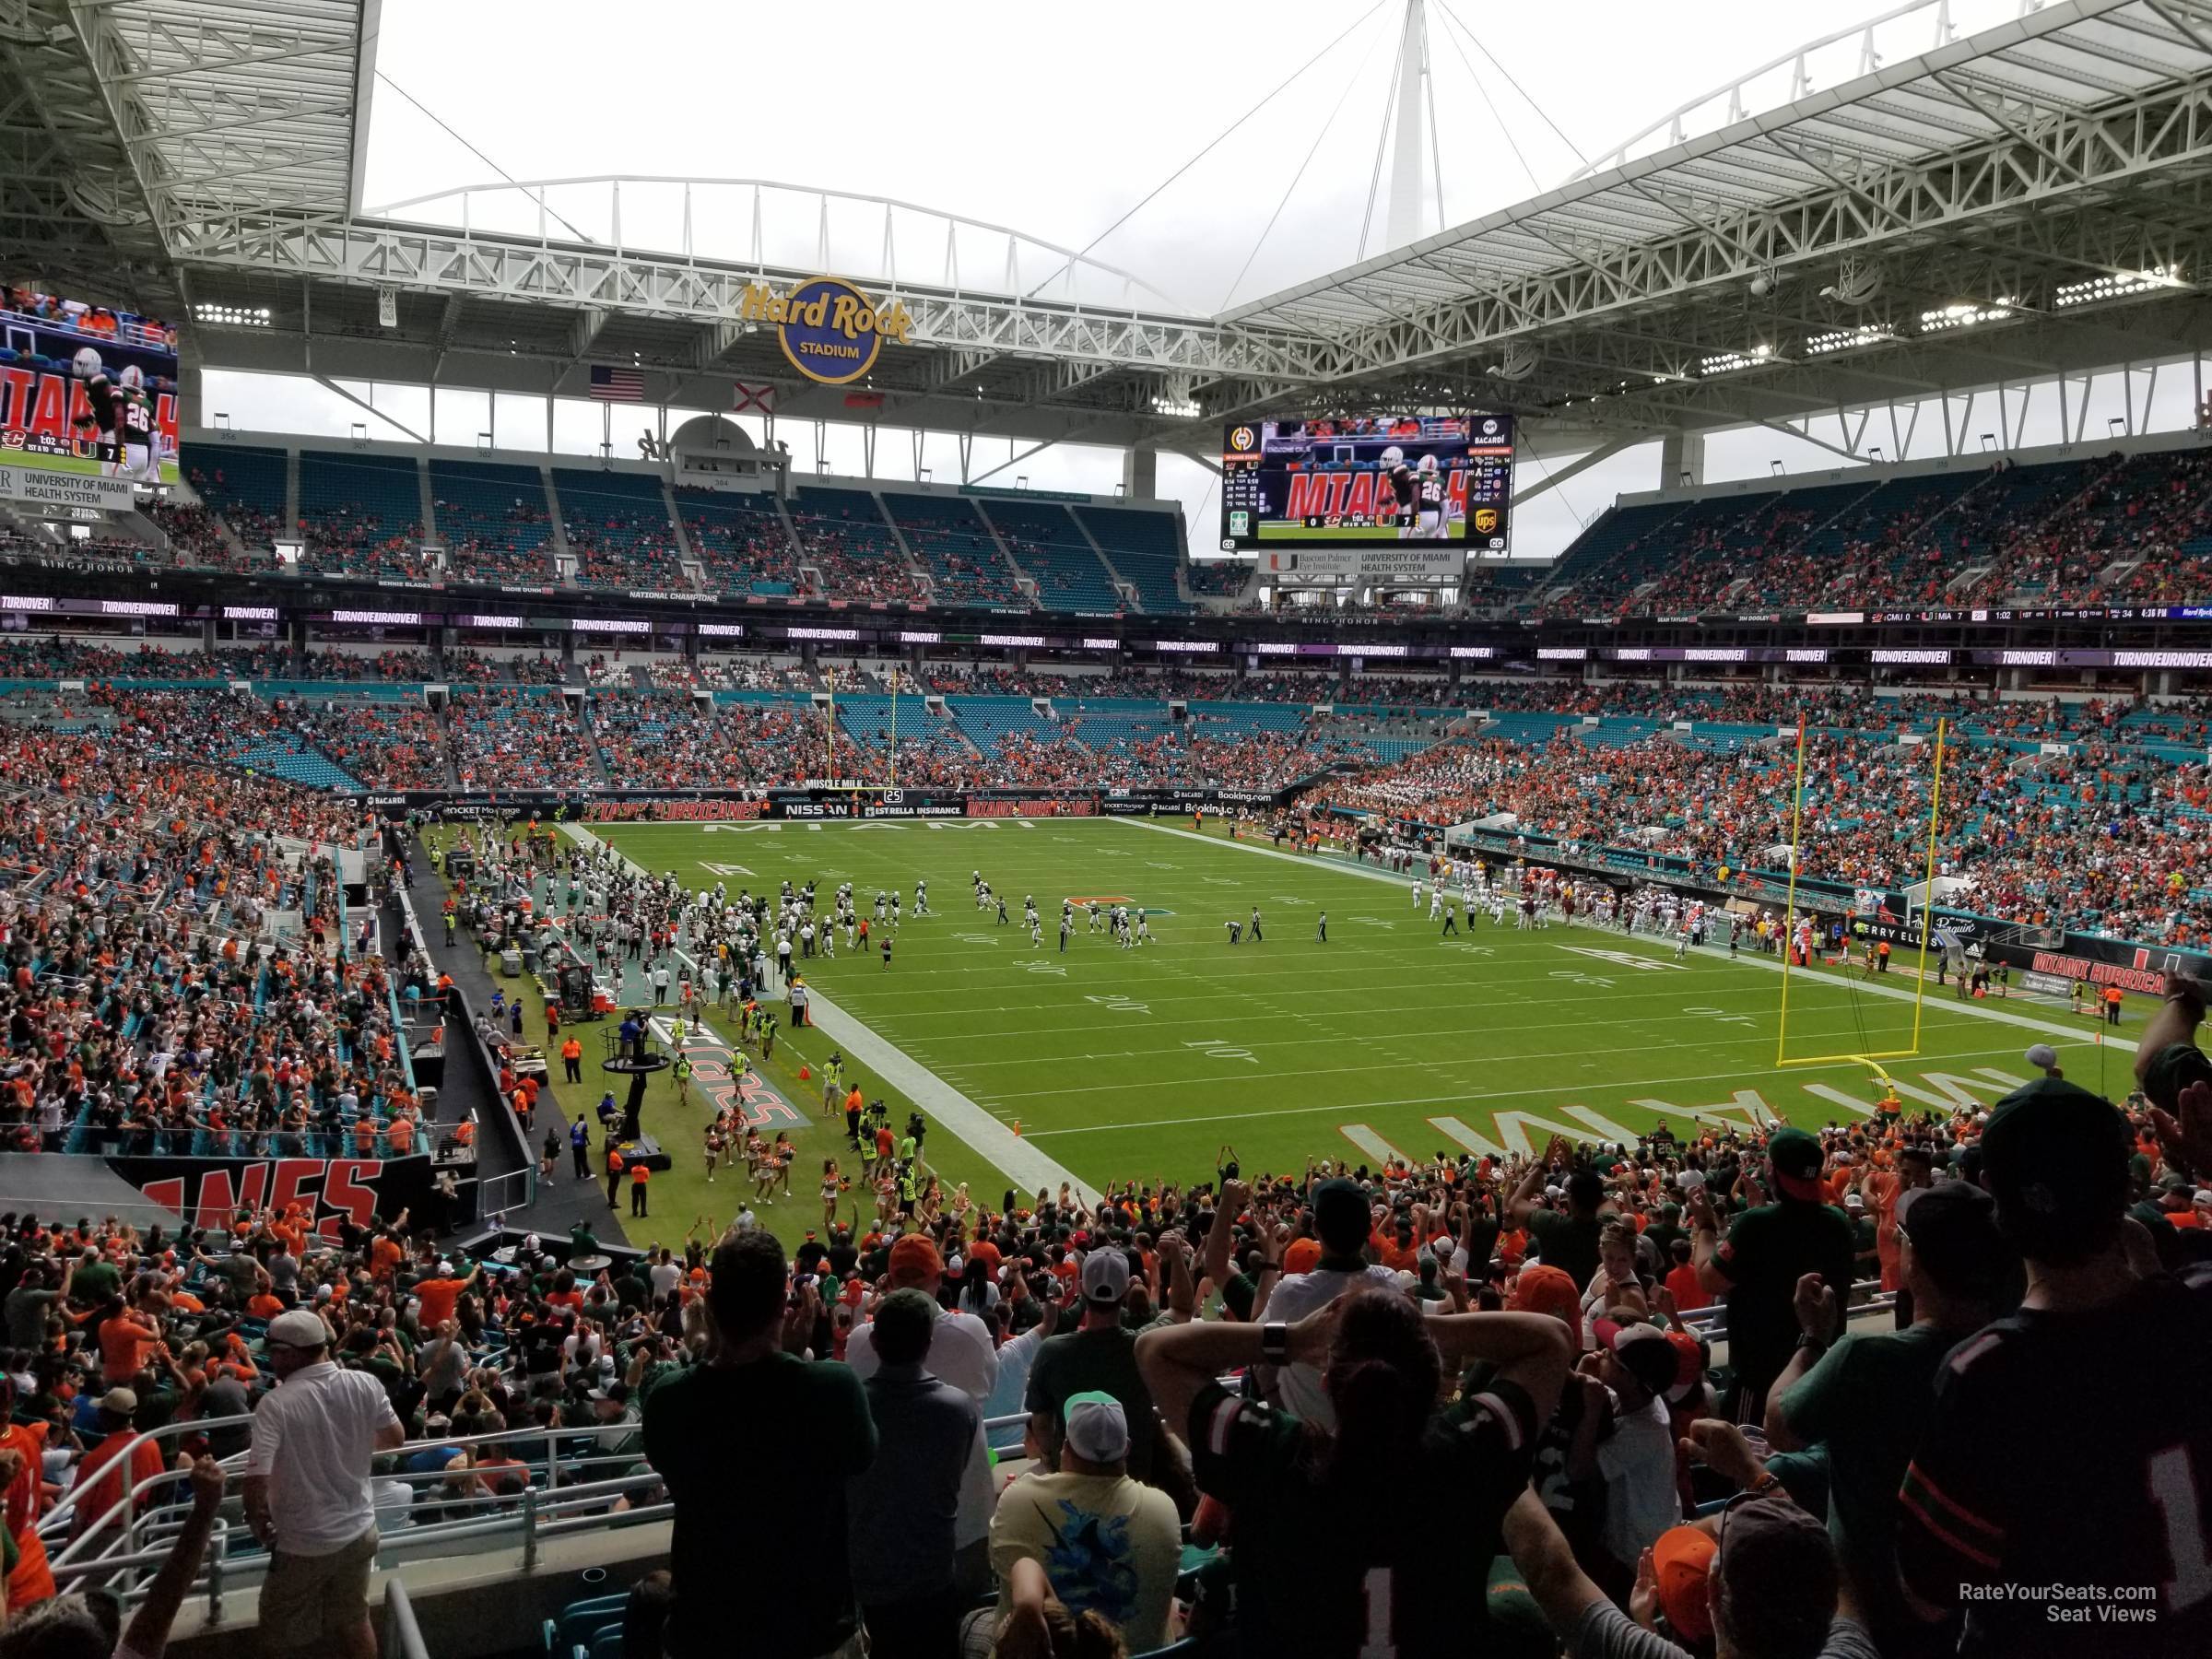 section 236, row 10 seat view  for football - hard rock stadium